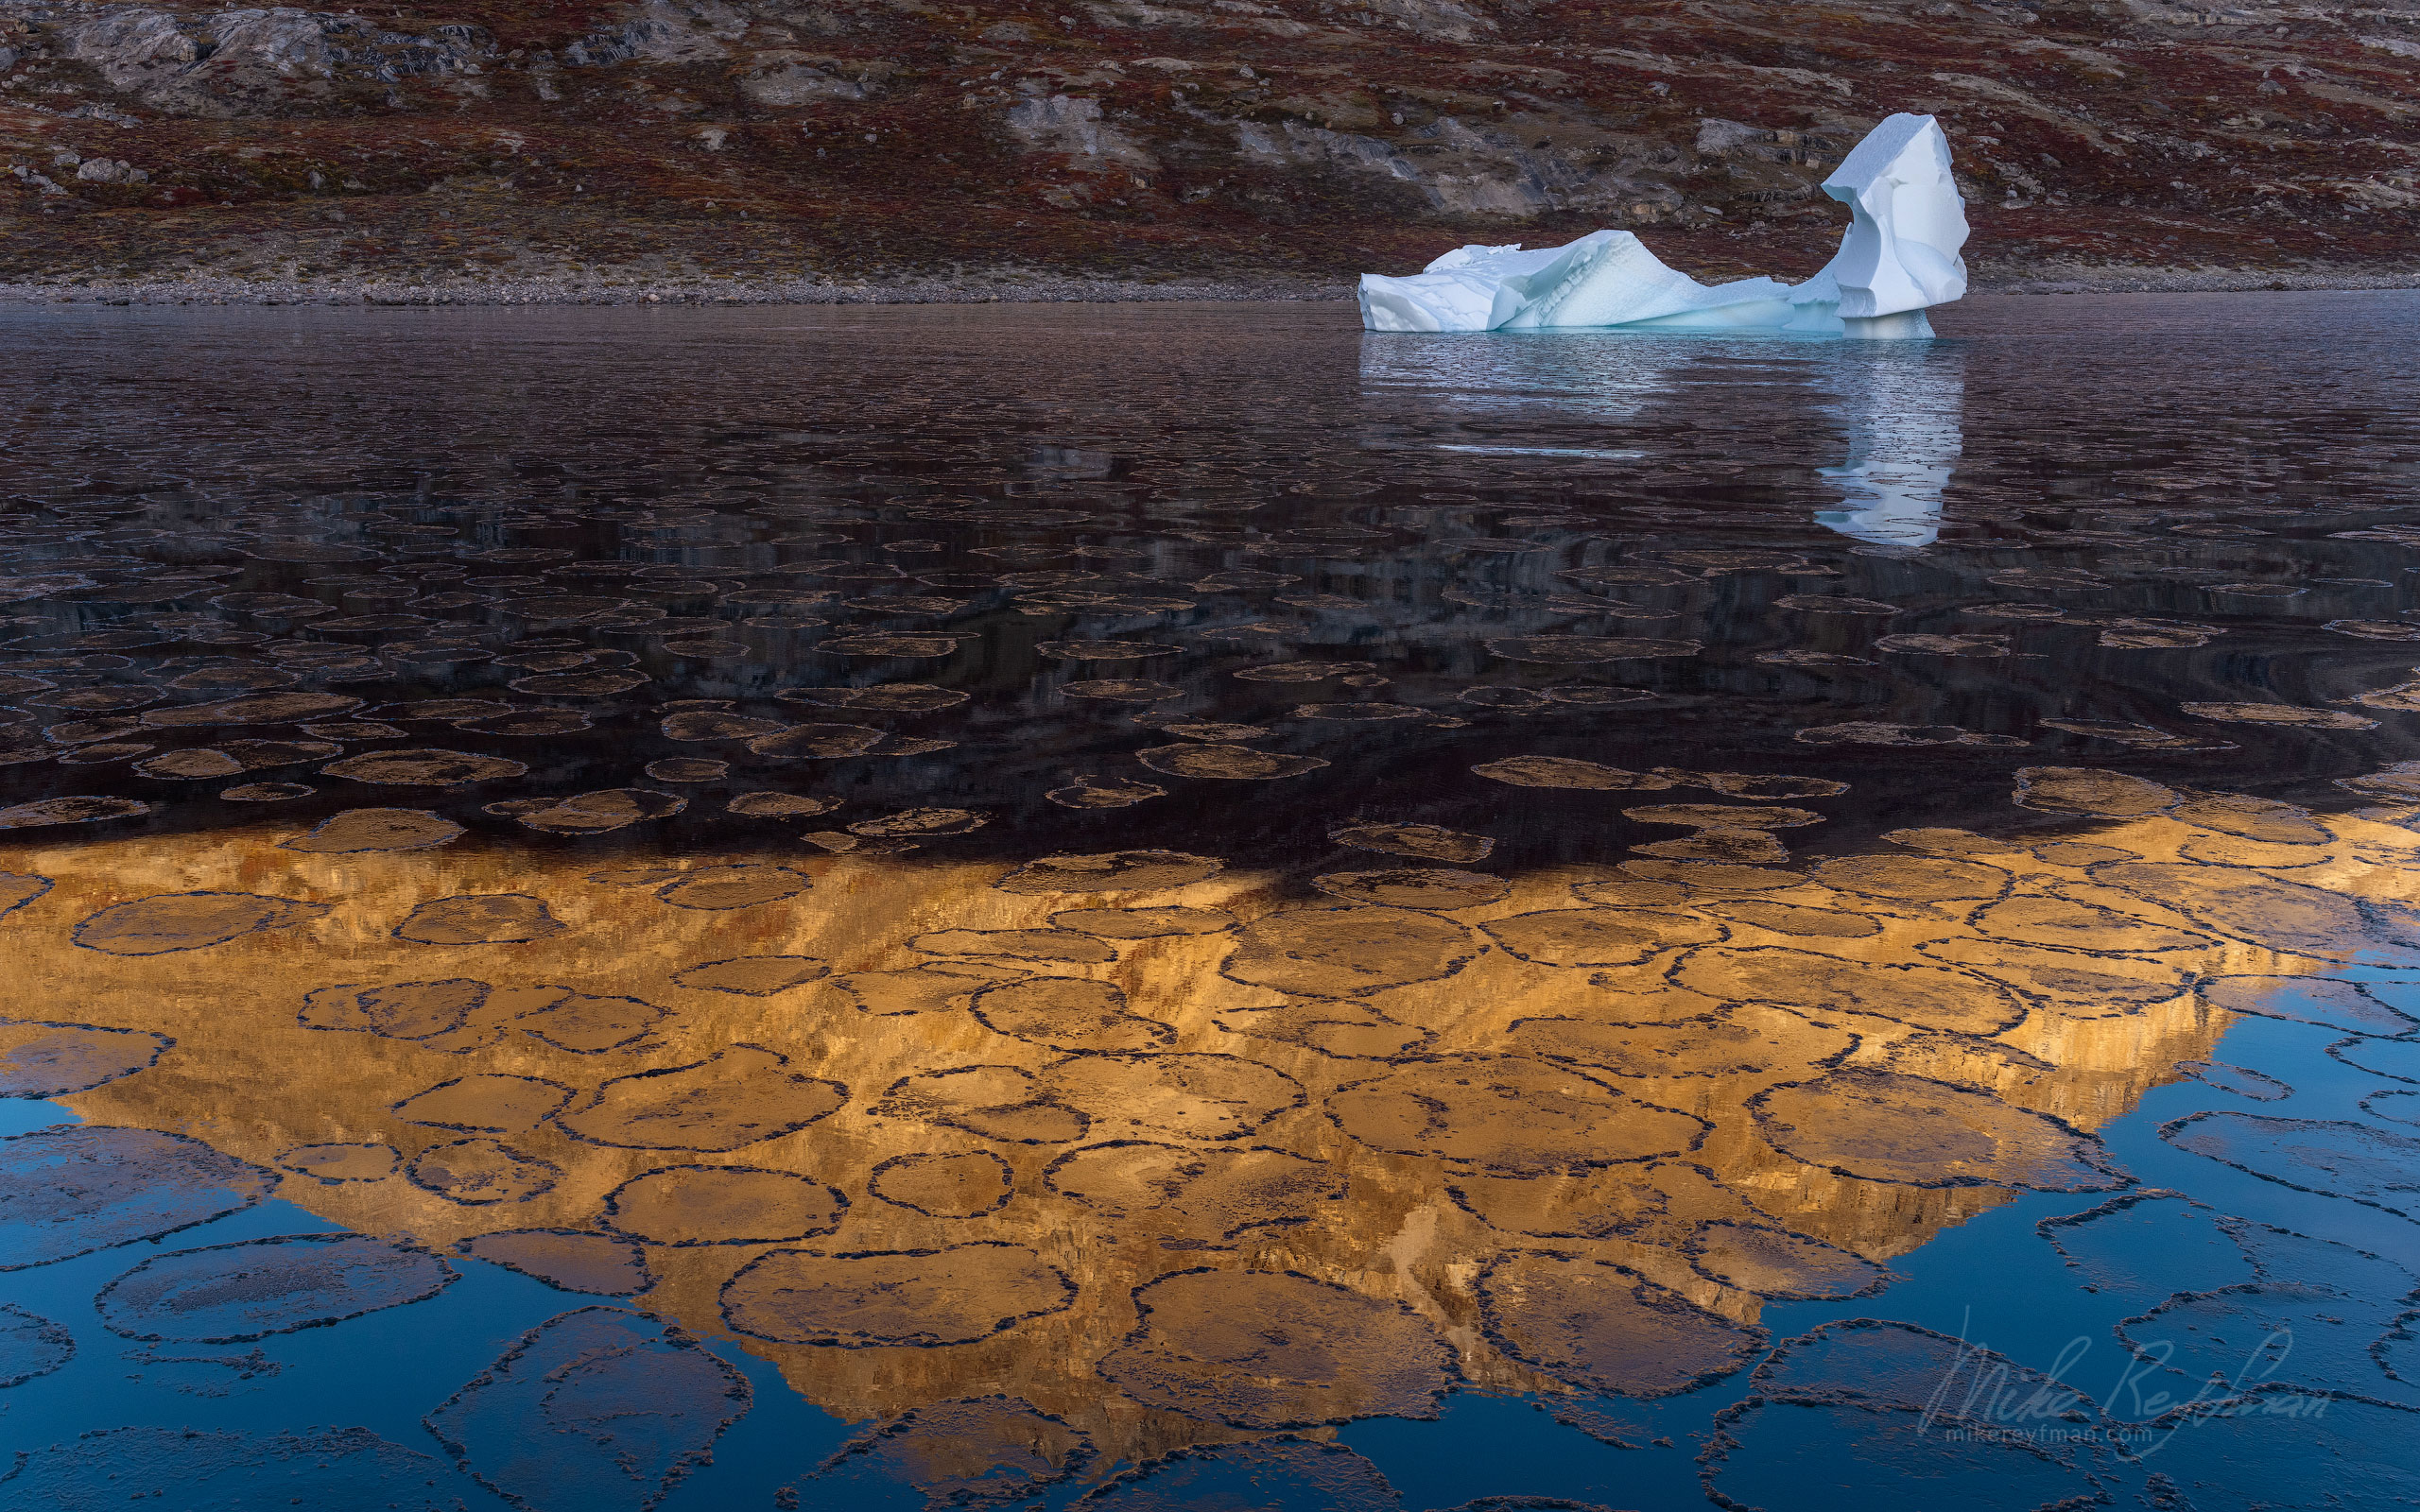 First Ice forming in the fjord. Scoresby Sund. Greenland. 042-GR-SC_50B6453 - The Scoresby Sund fjord system and the settlement of Ittoqqortoormiit. East Greenland. - Mike Reyfman Photography